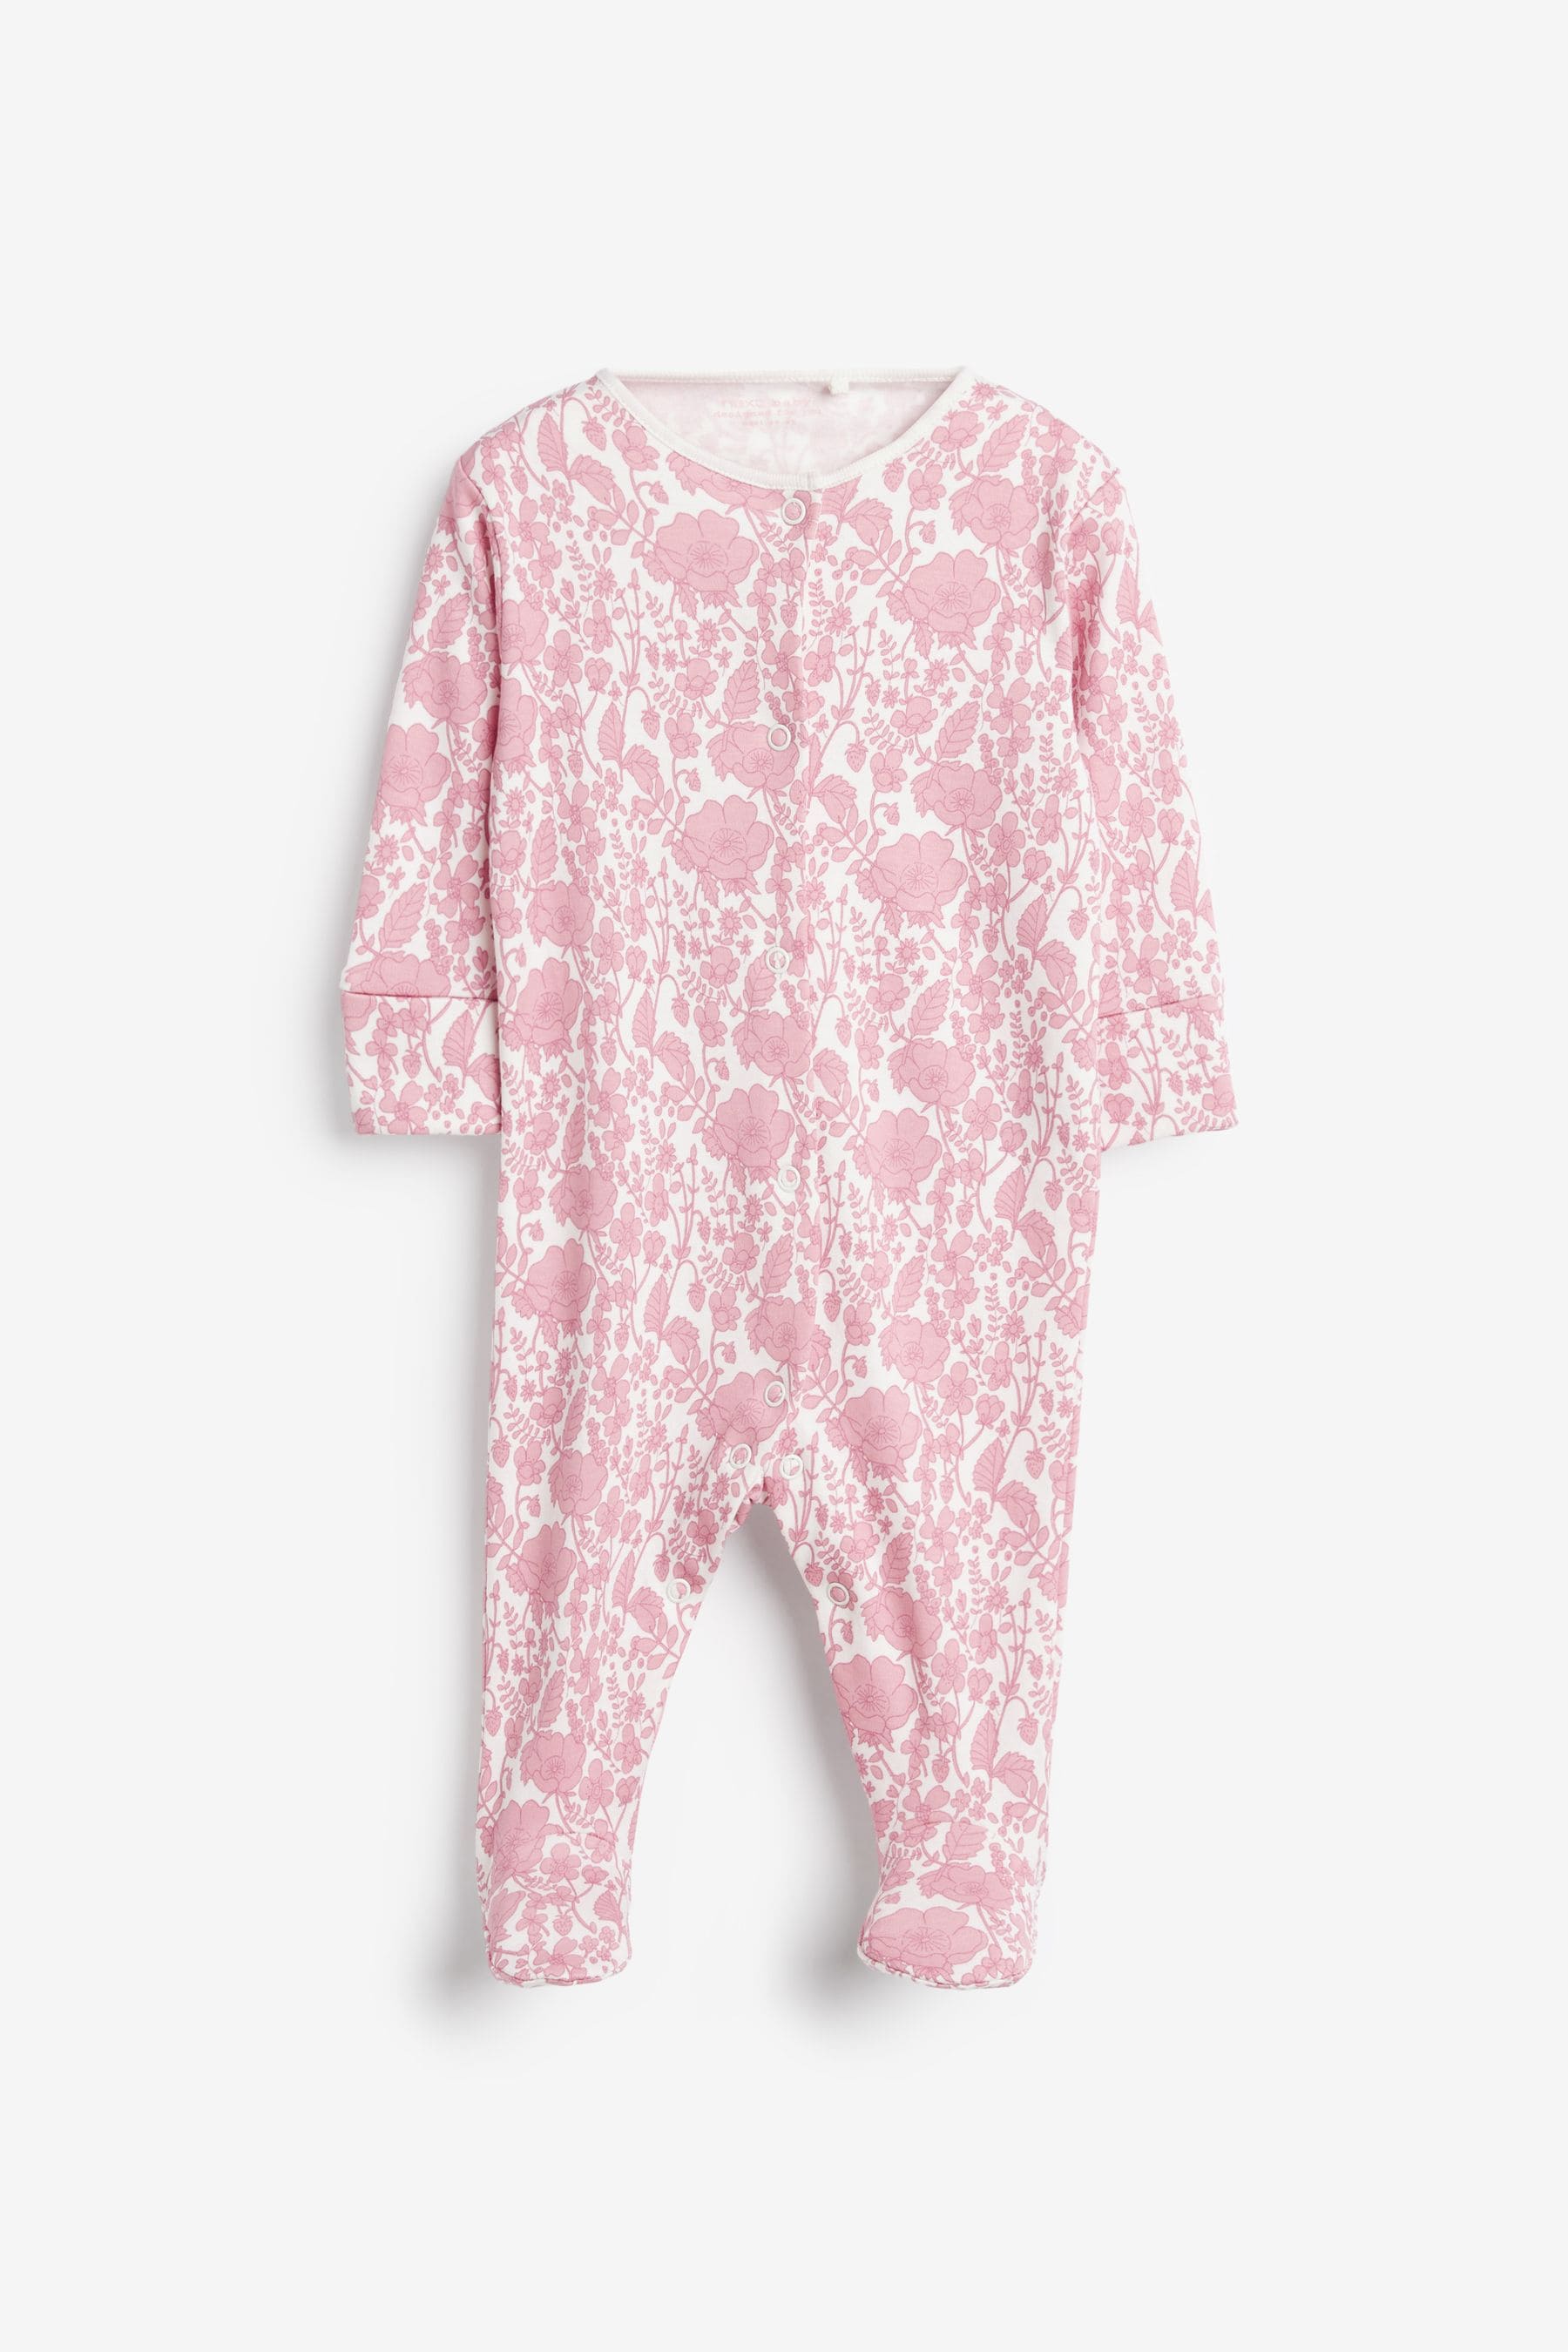 Pink Floral Baby Sleepsuits 5 Pack (0mths-2yrs)